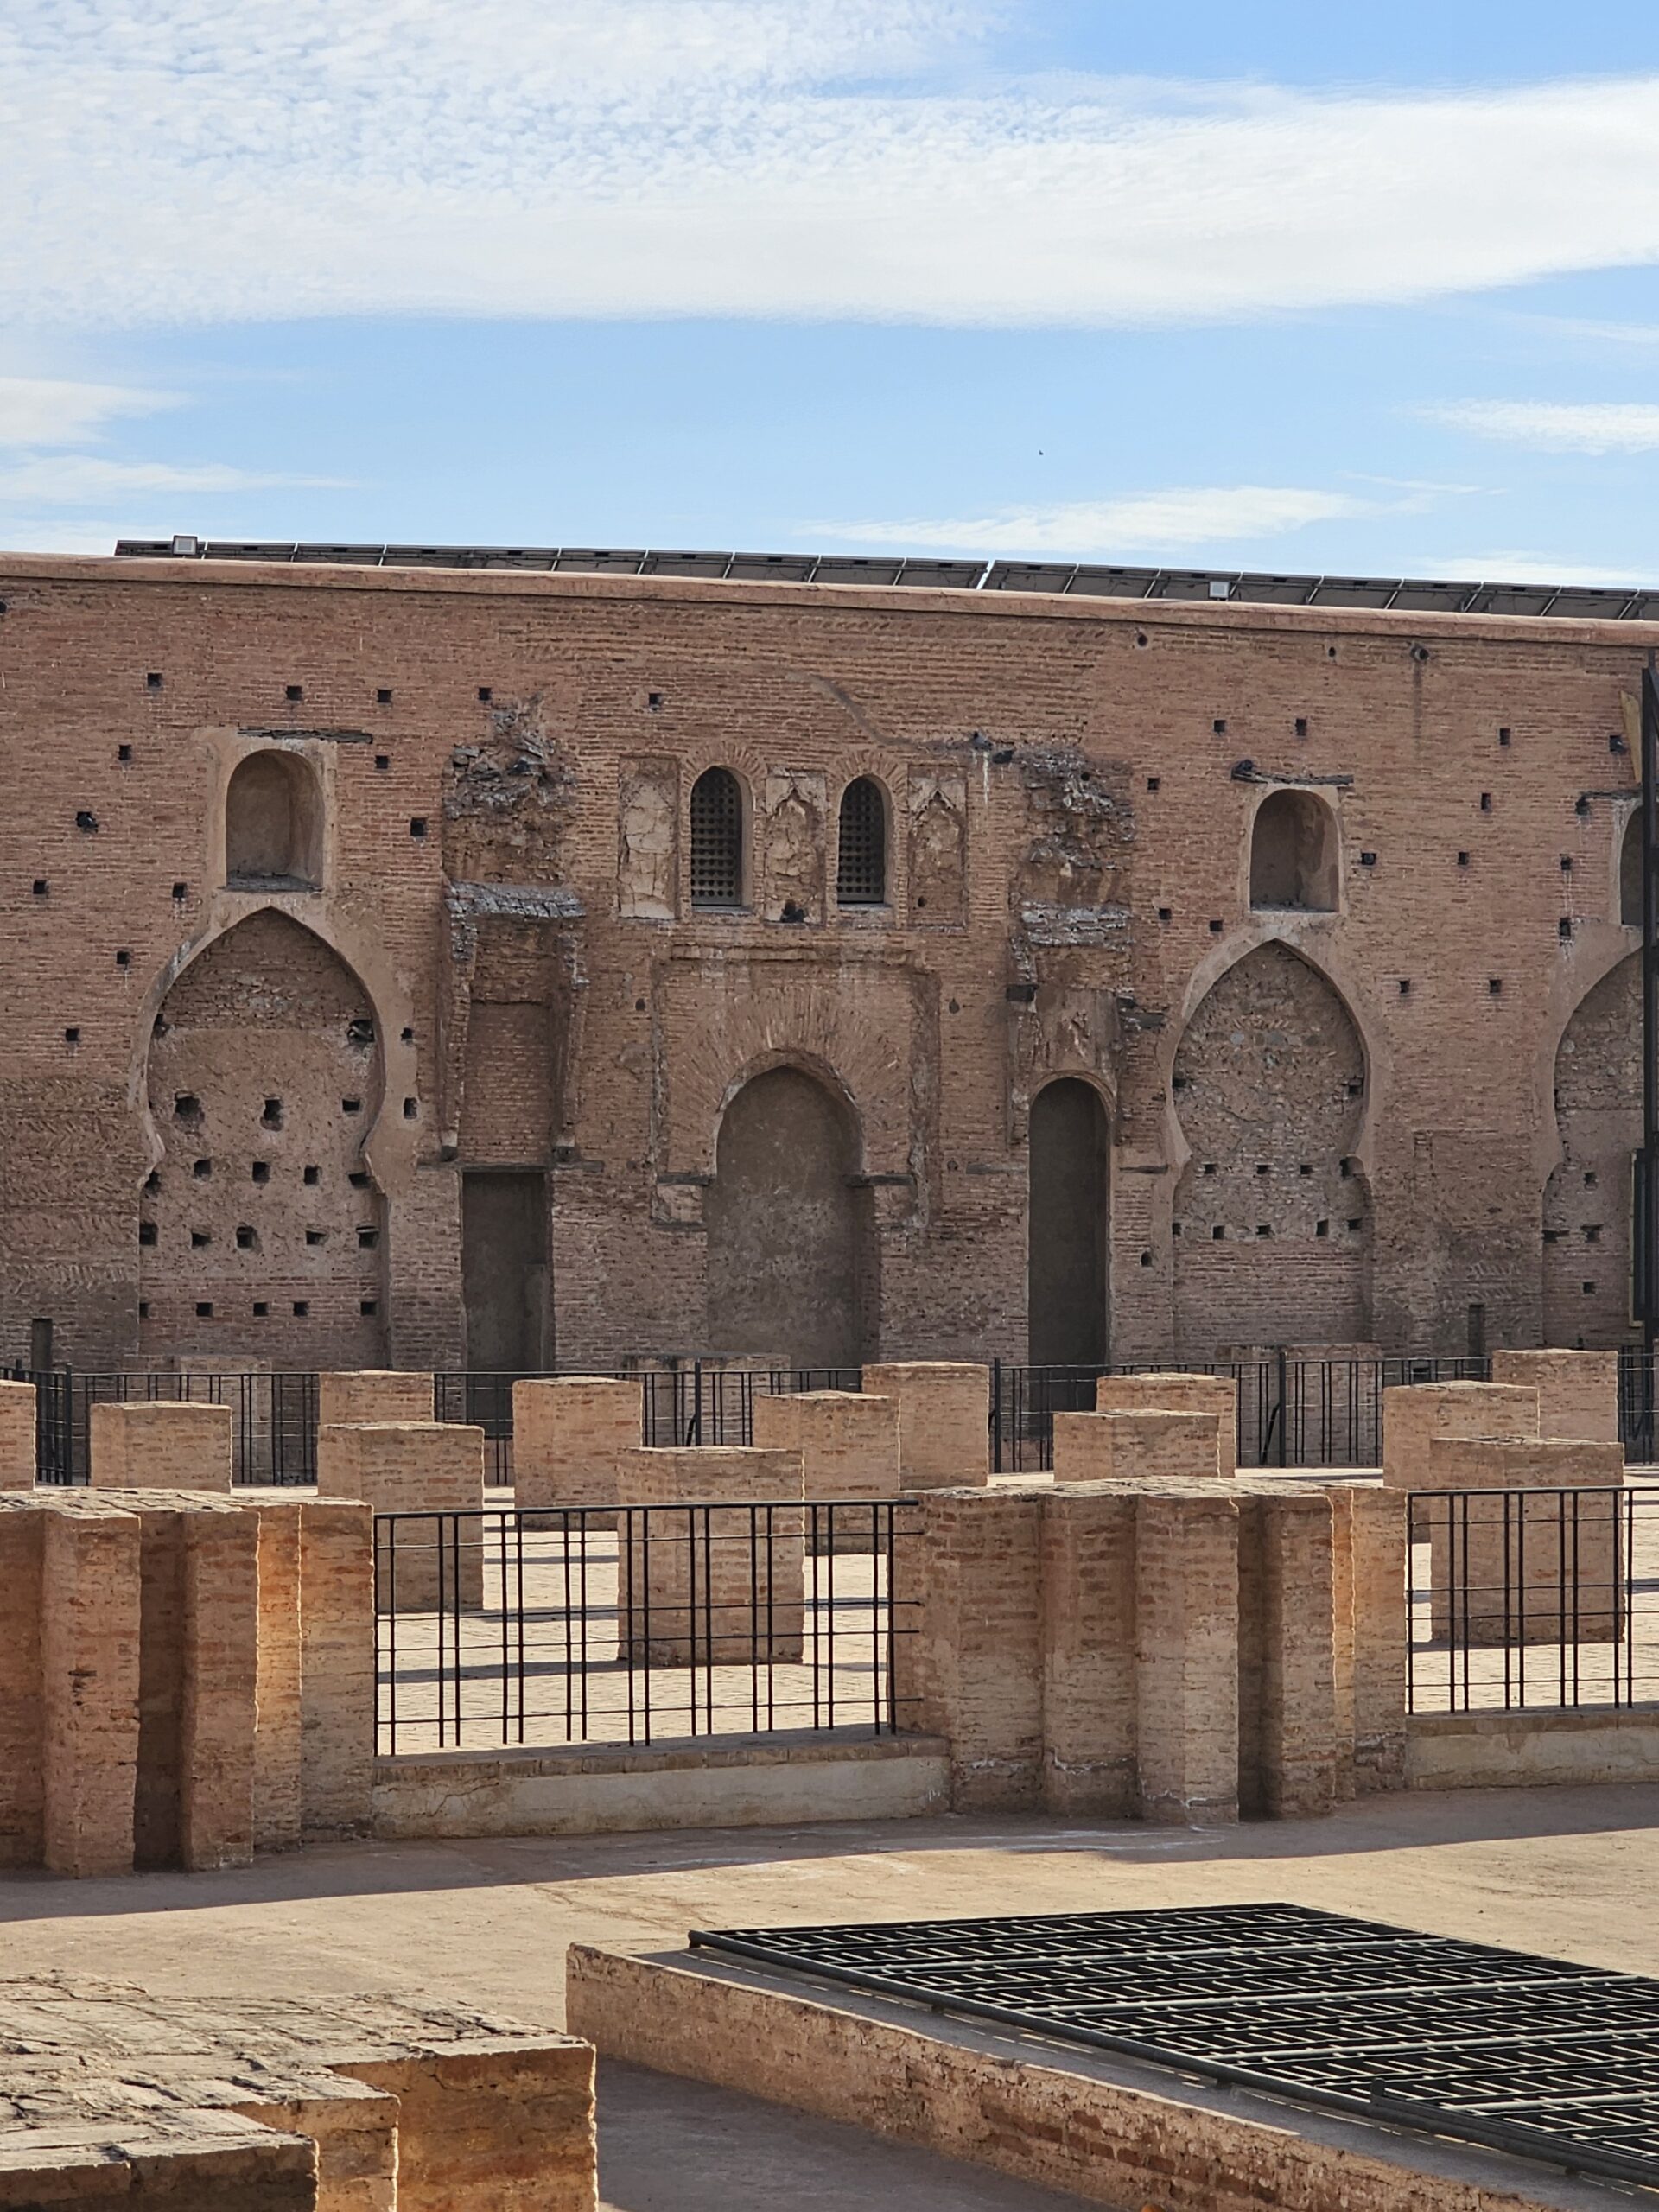 Side wall of Koutoubia Mosque, Marrakesh. Image by 360onhistory.com